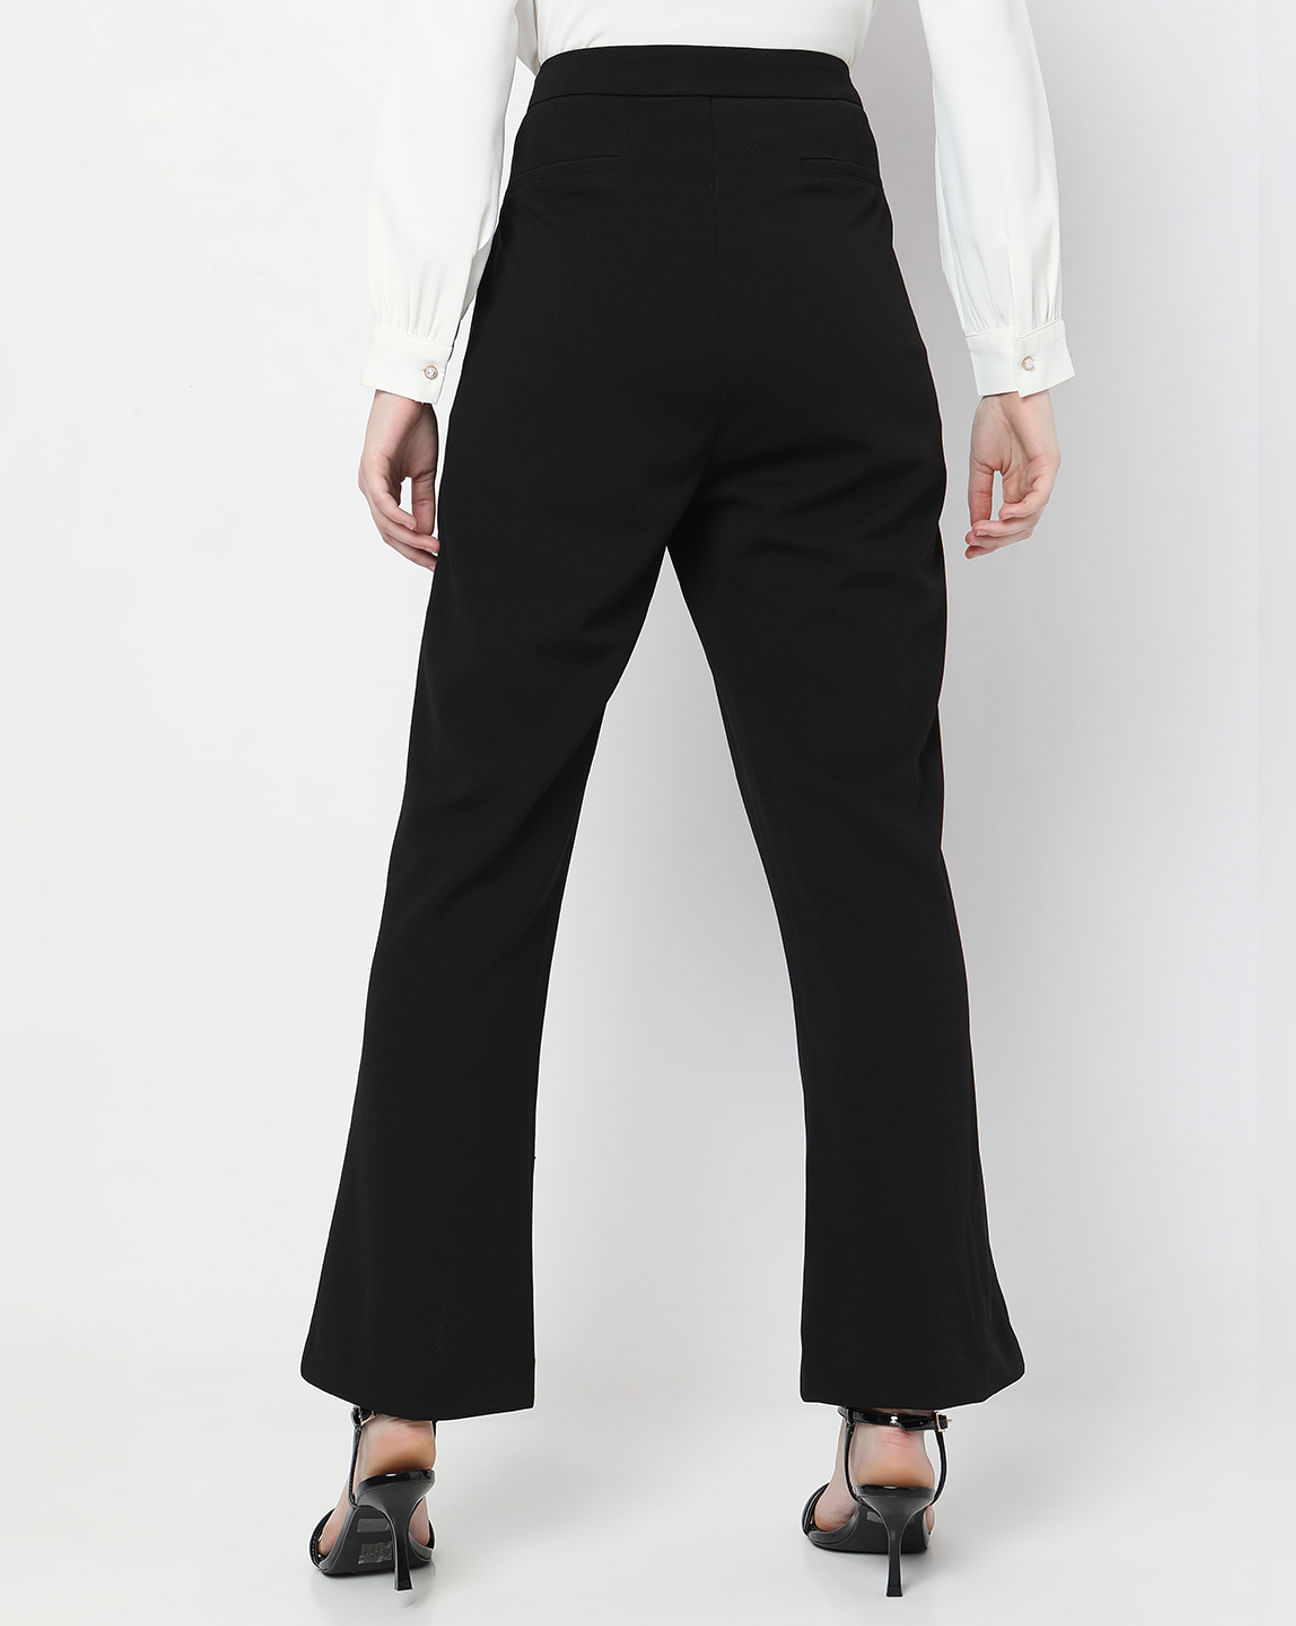 Head to the Office Black High-Waisted Side Slit Trouser Pants